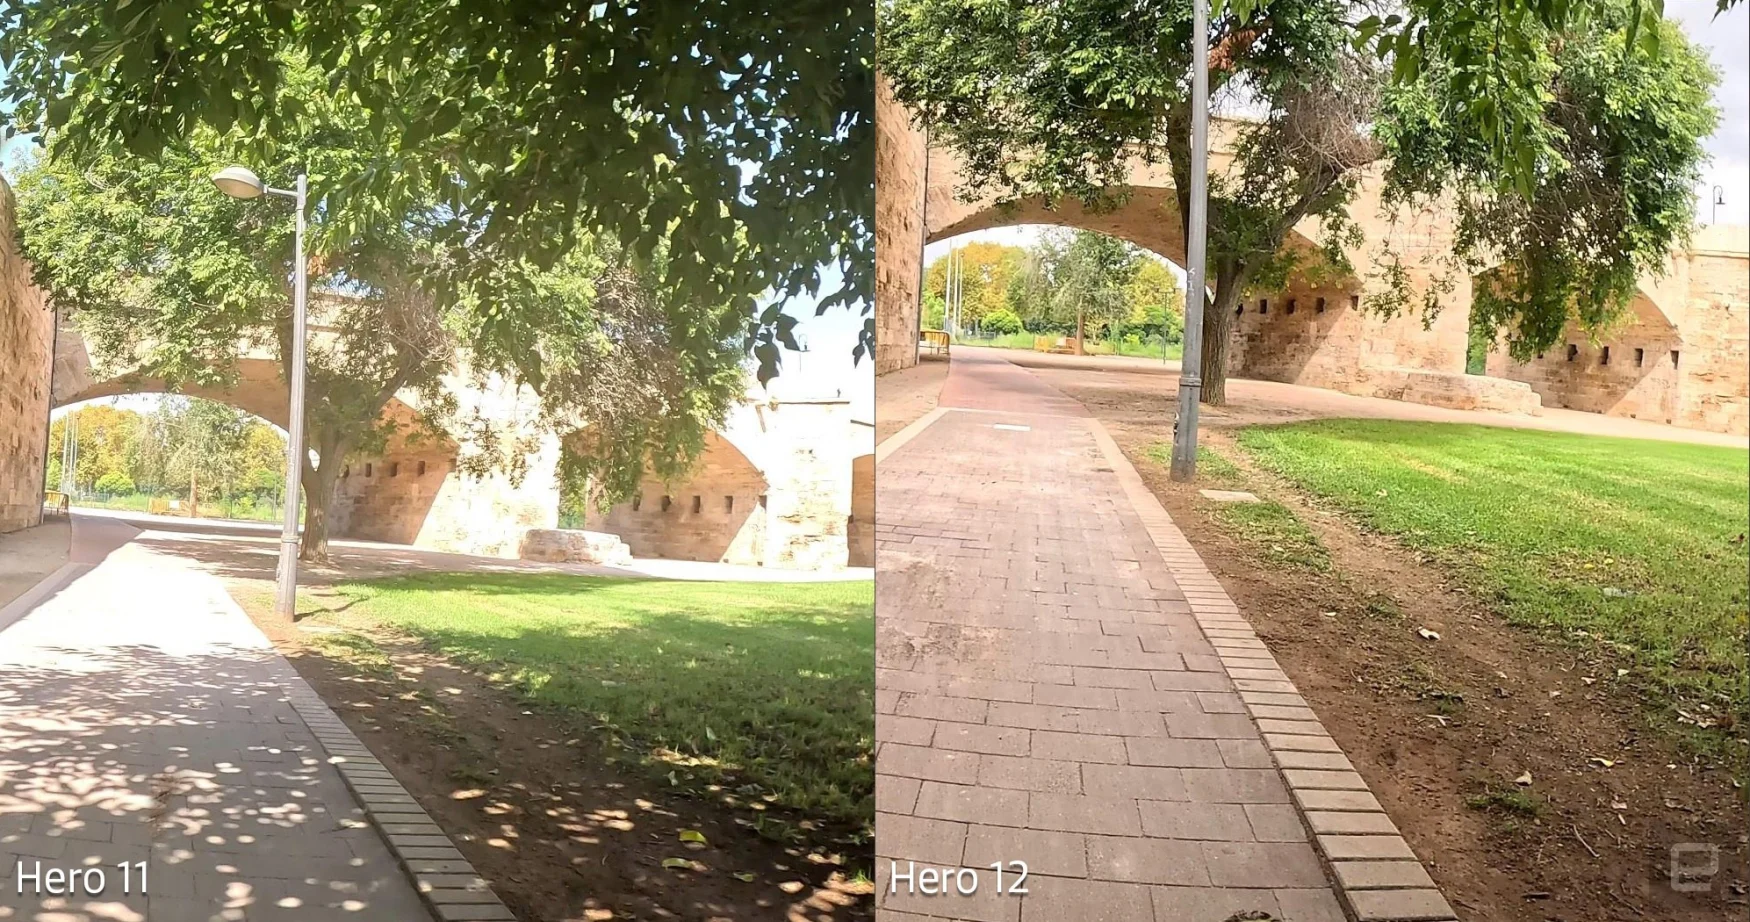 Two different images of the same bicycle track are shown. One from the GoPro Hero 11 Black and the other from the GoPro Hero12 Black with HDR video mode activated.